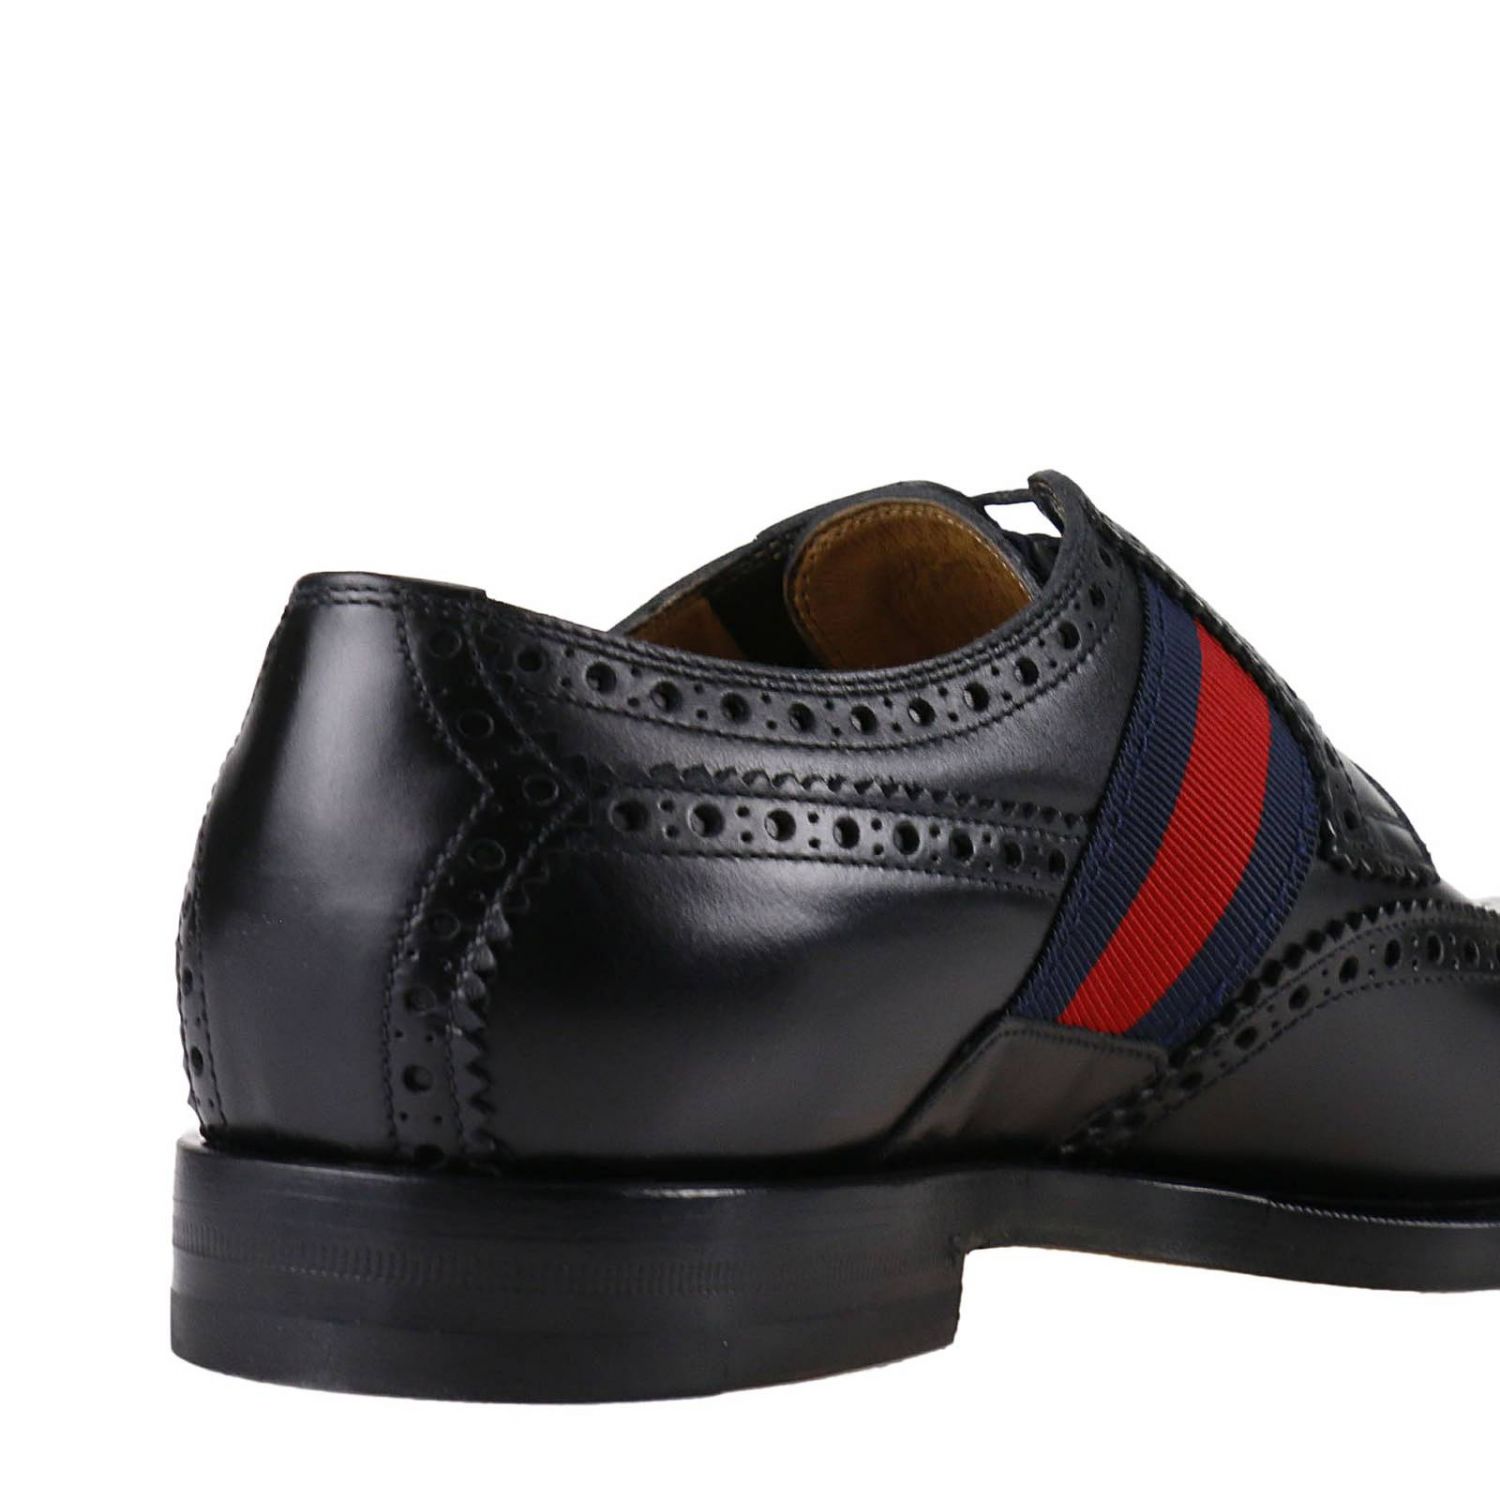 gucci oxford shoes